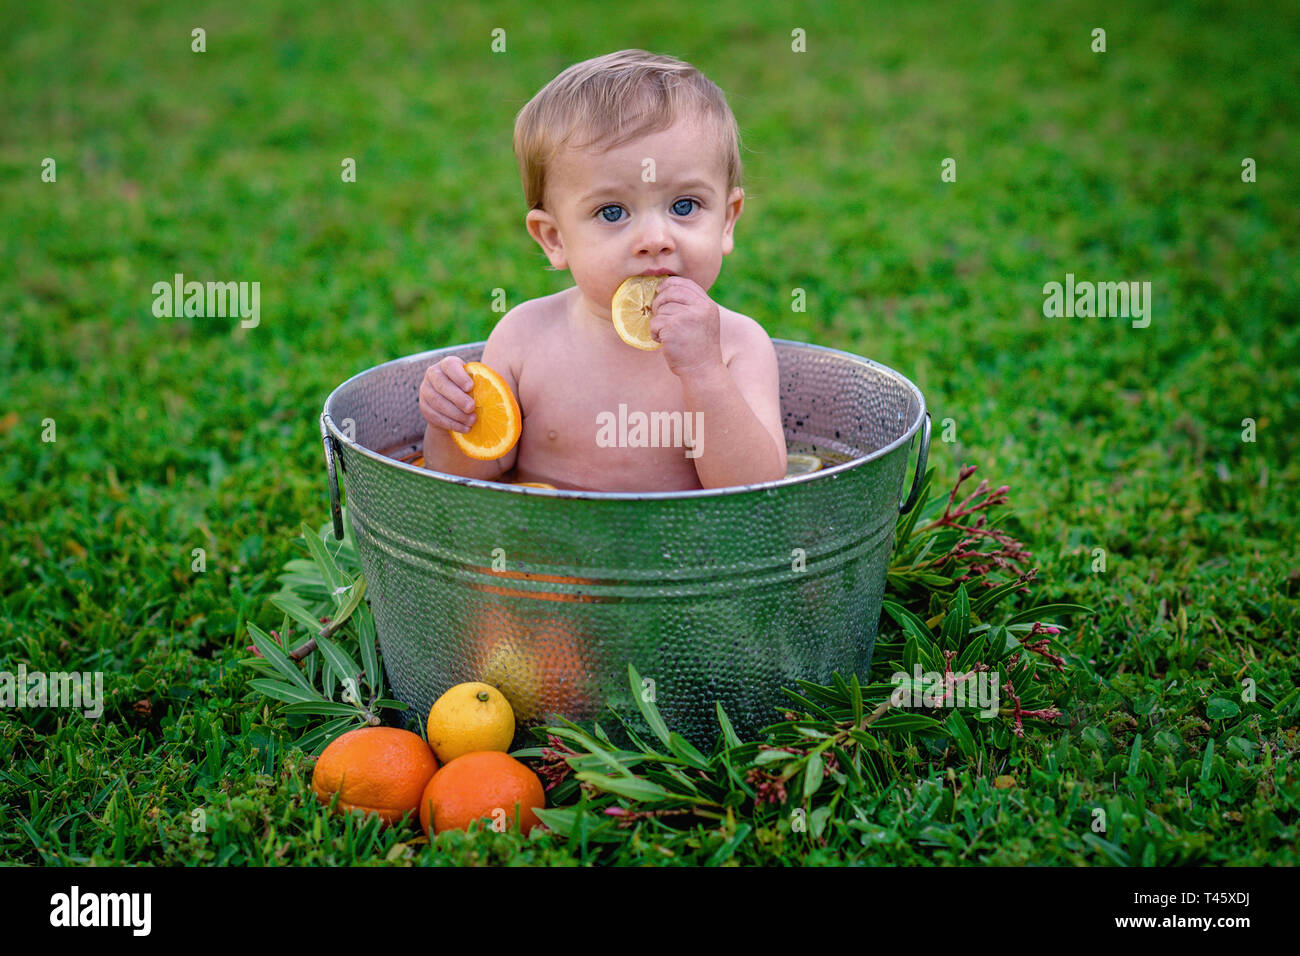 Smiling Baby in bucket with fruit Stock Photo